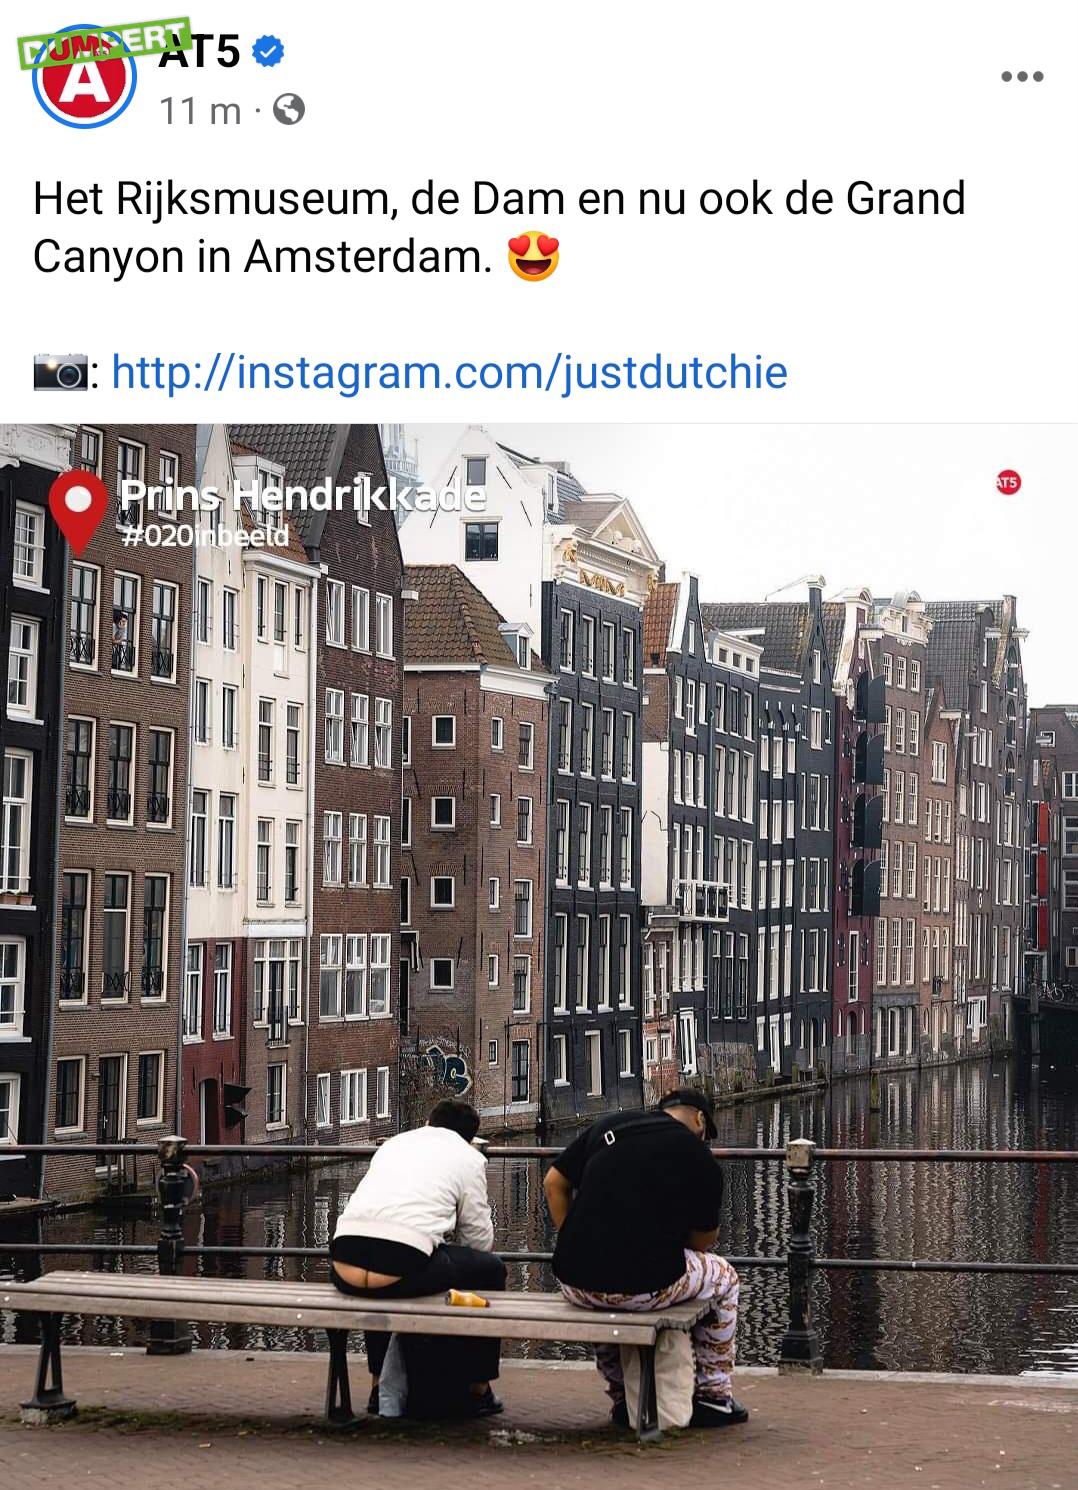 Grand Canyon in Amsterdam 